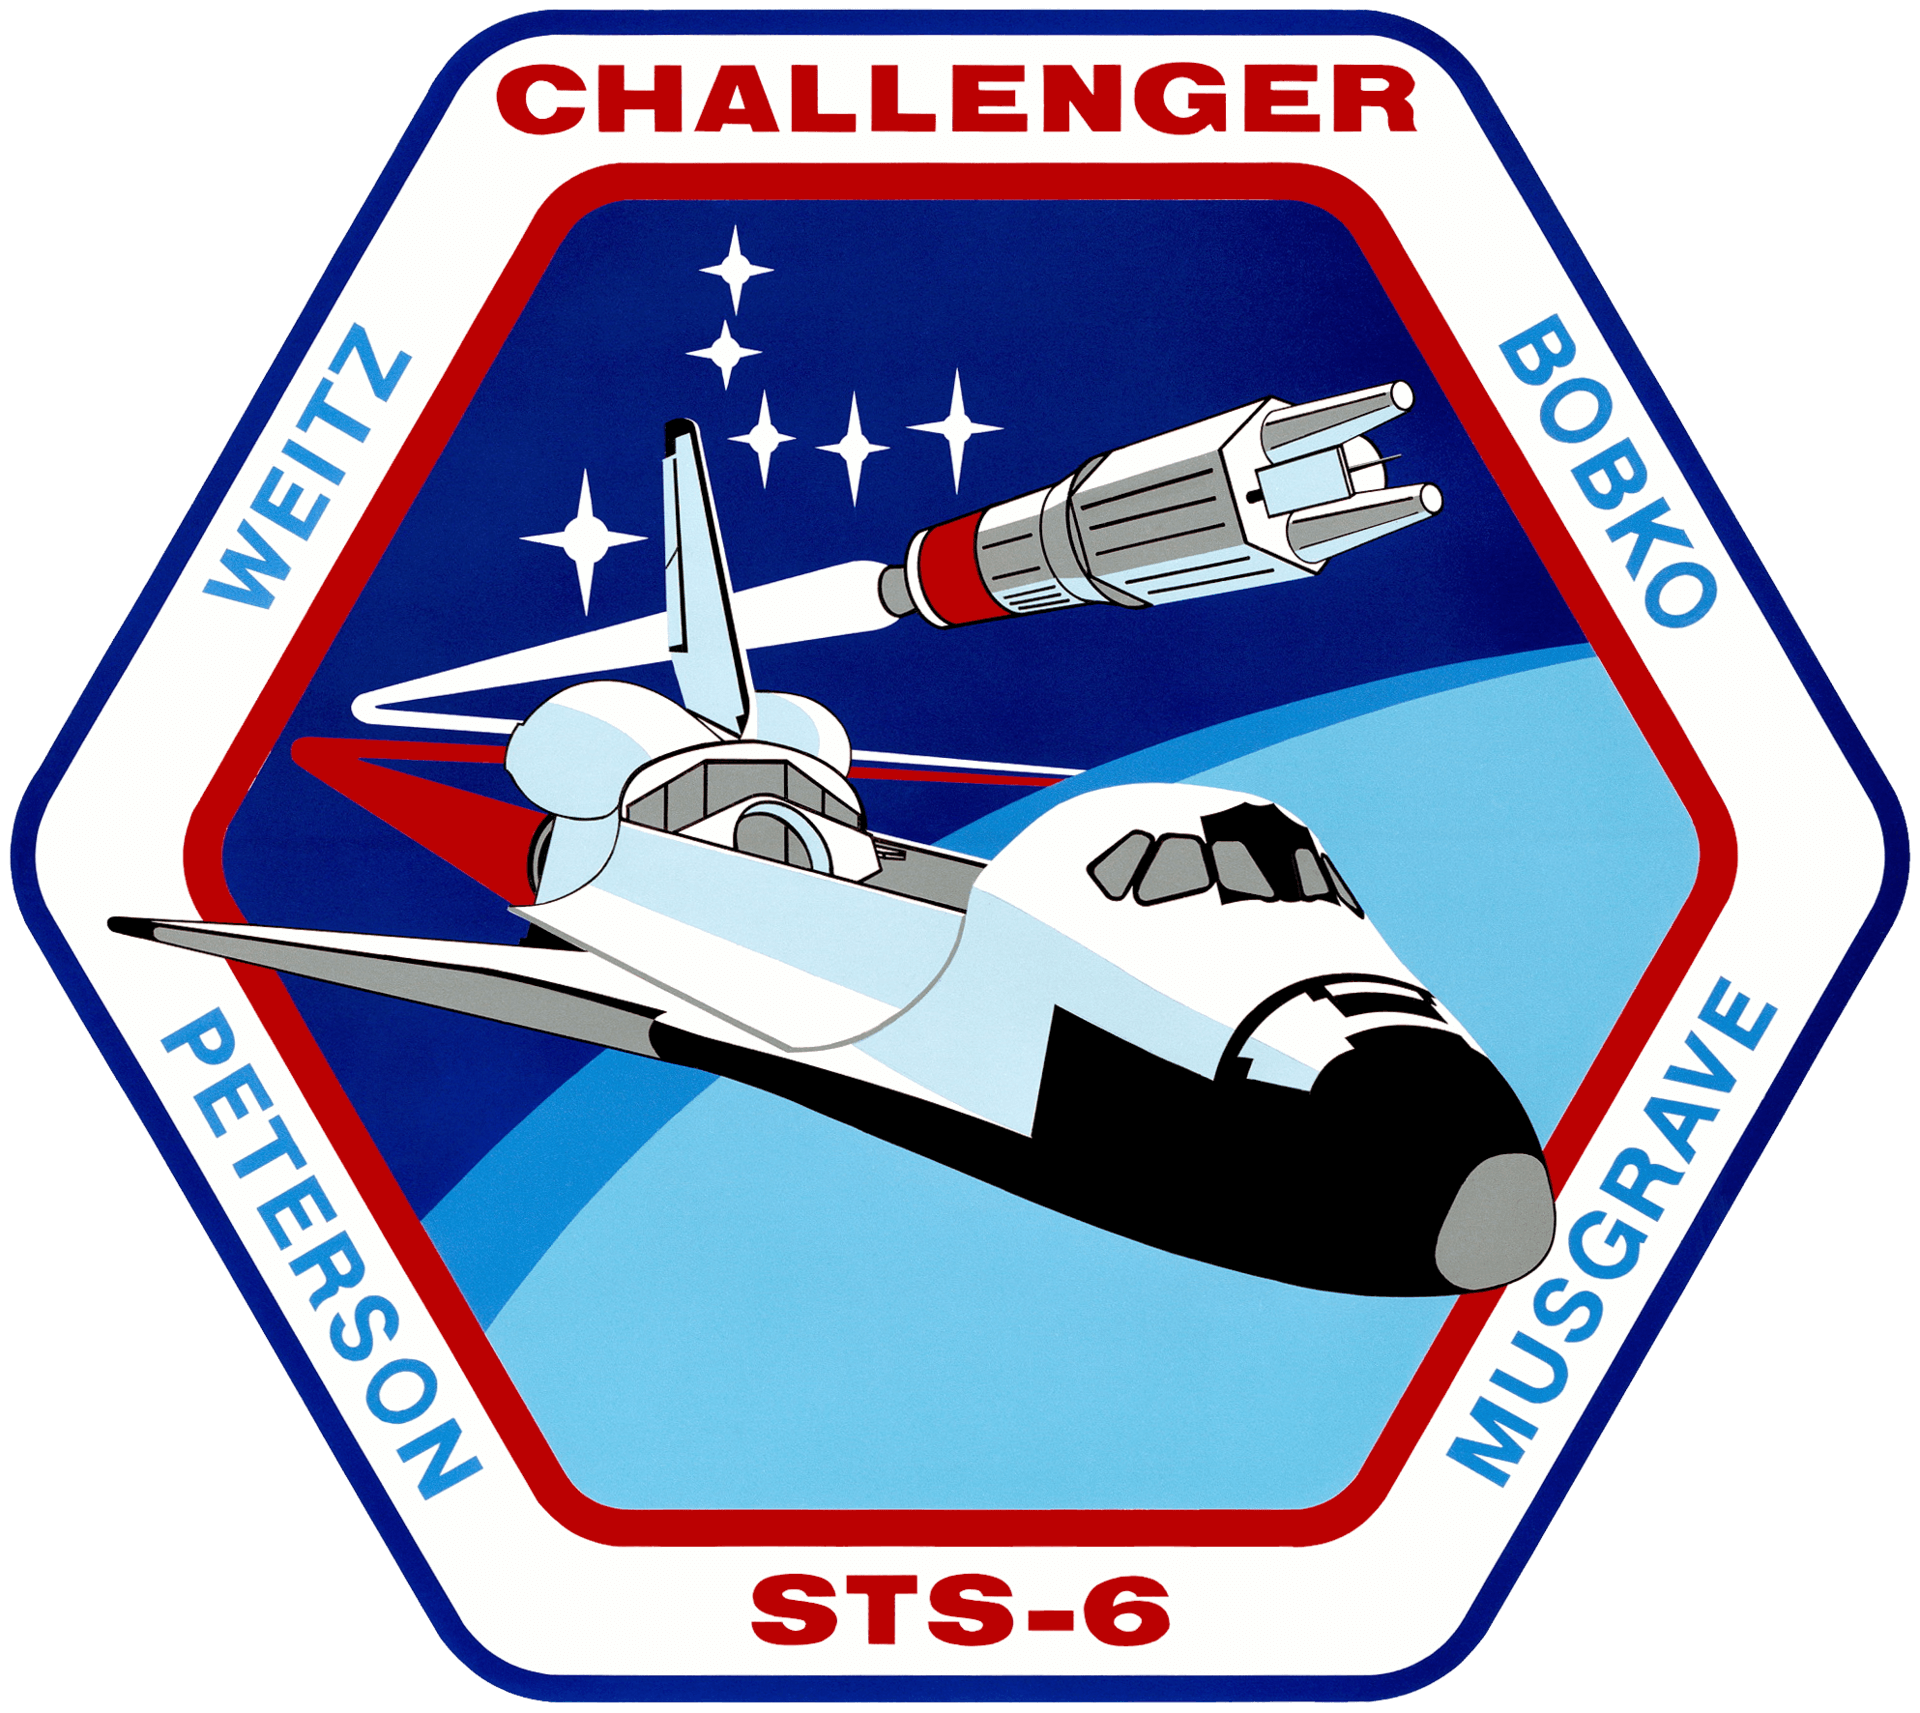 Mission patch for STS-6